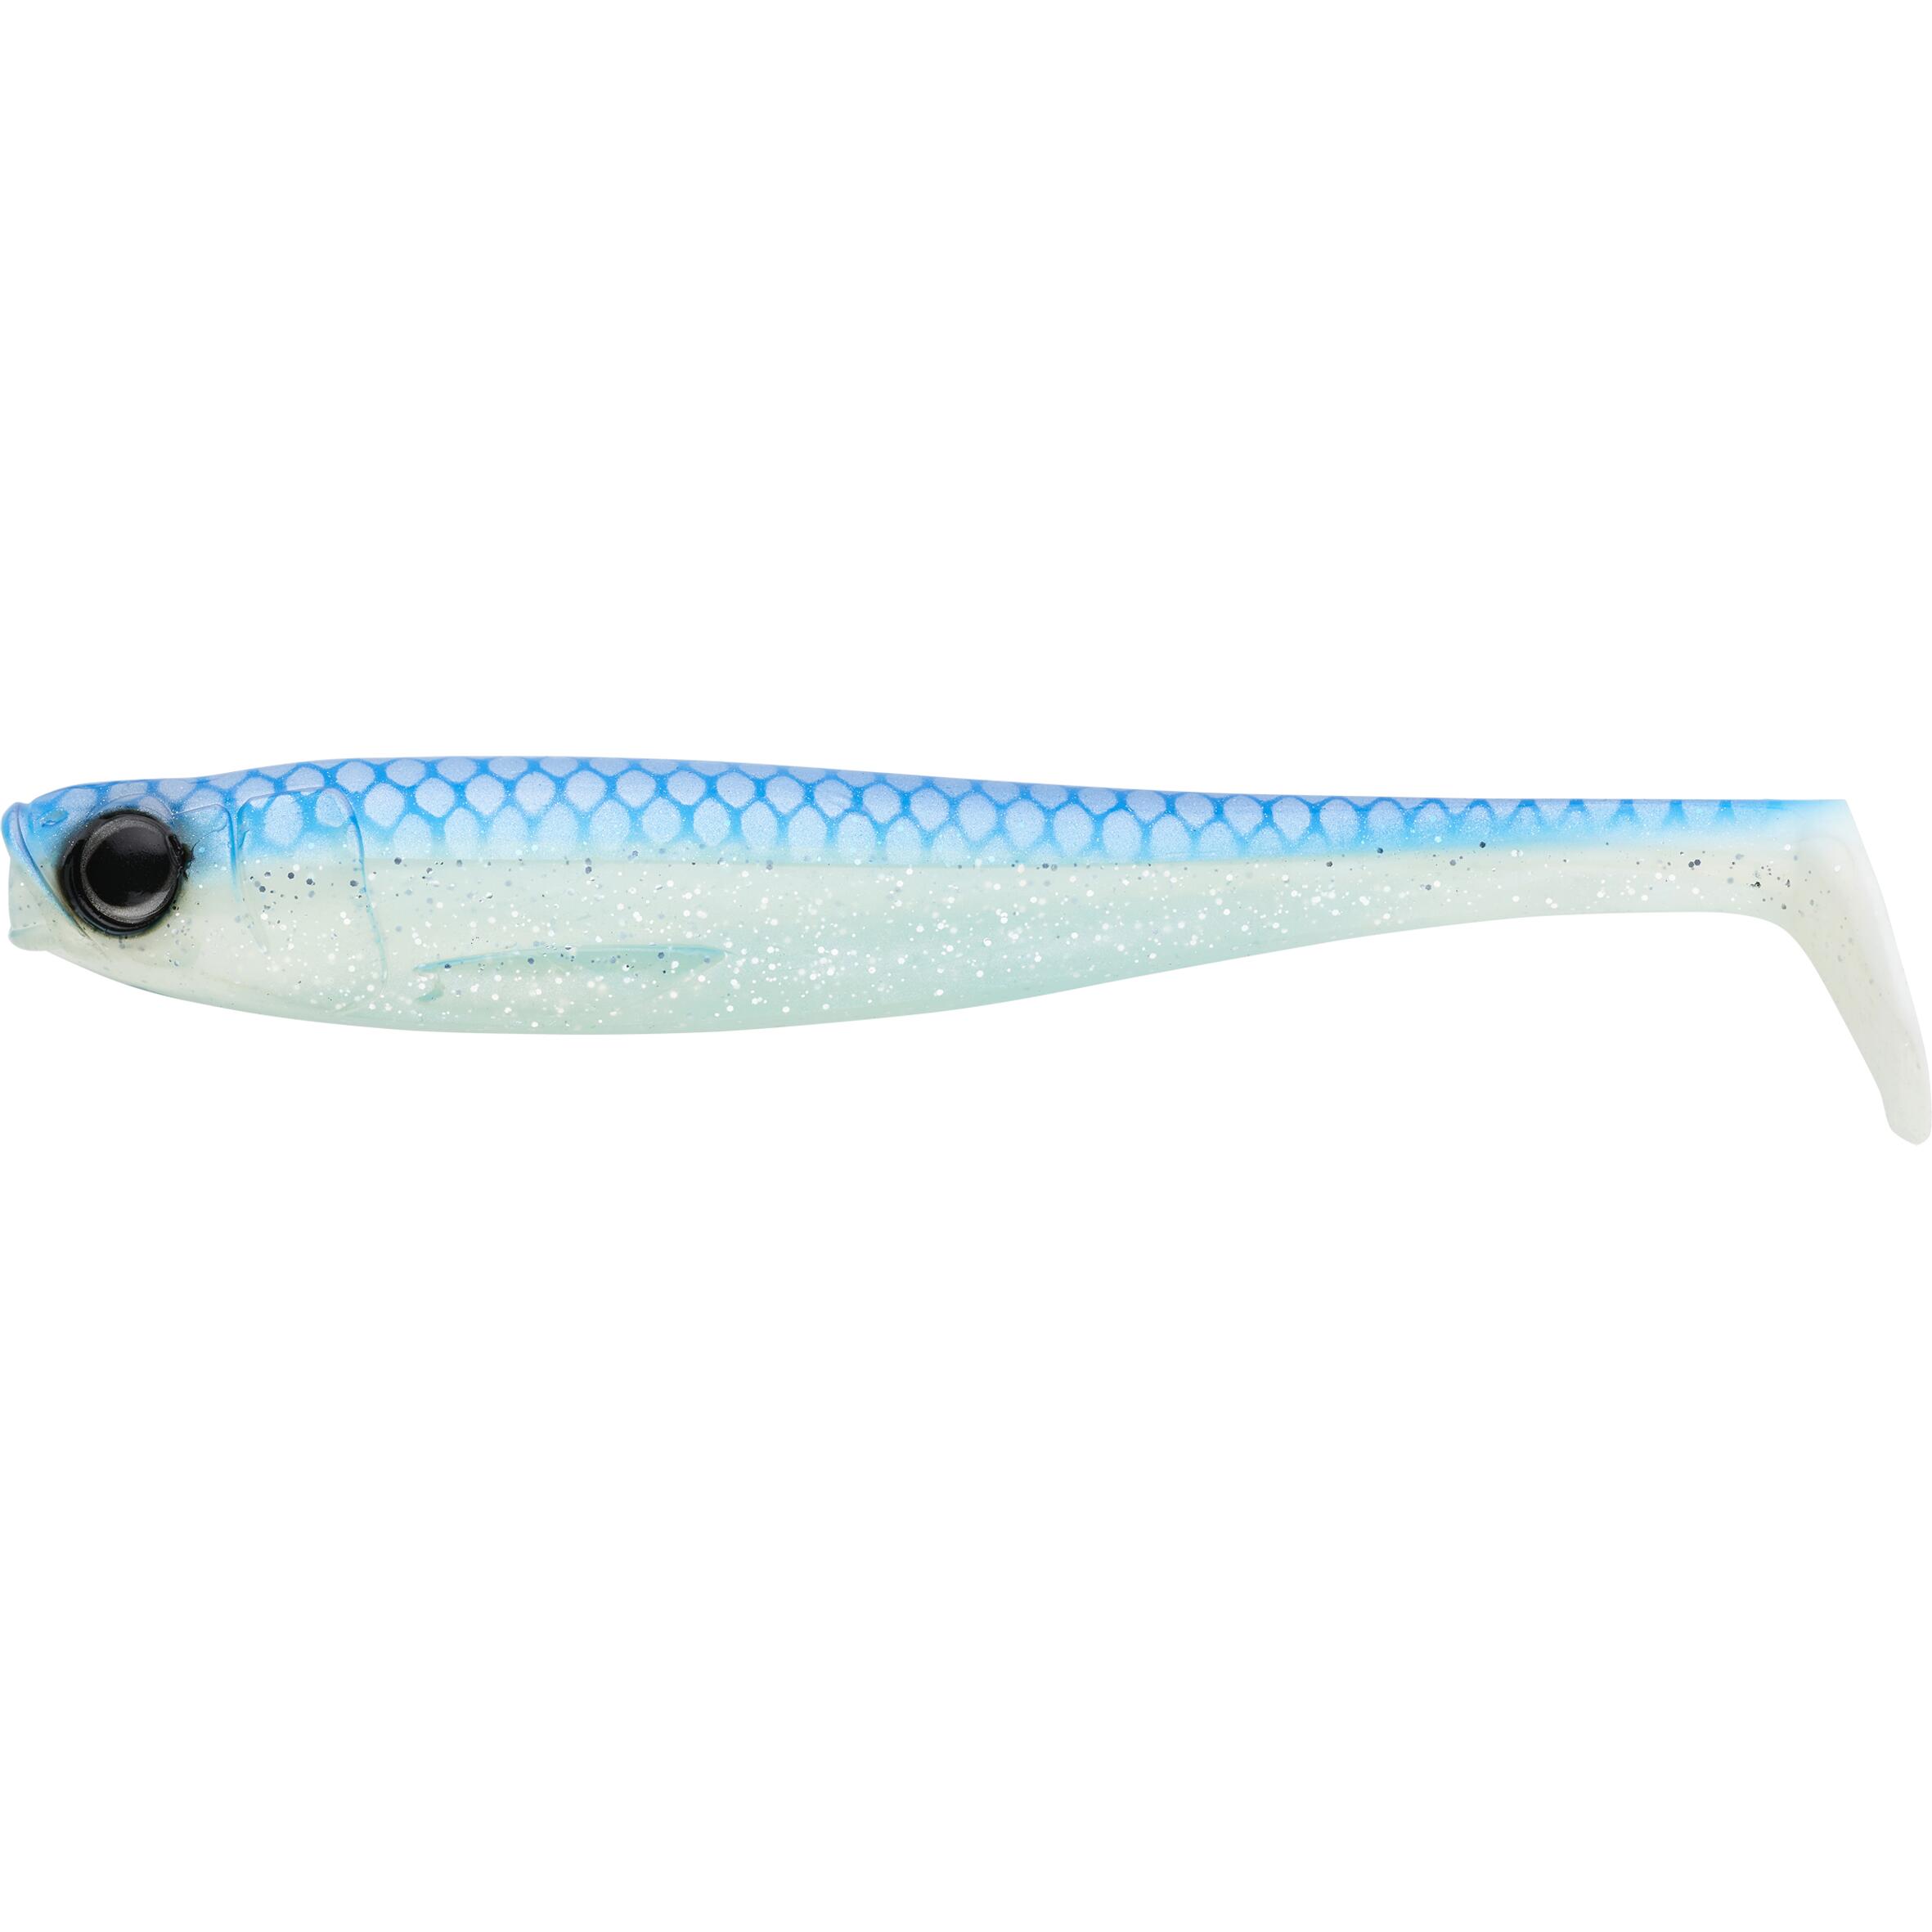 ROGEN SOFT SHAD PIKE LURE 250 BLUE X1 1/5